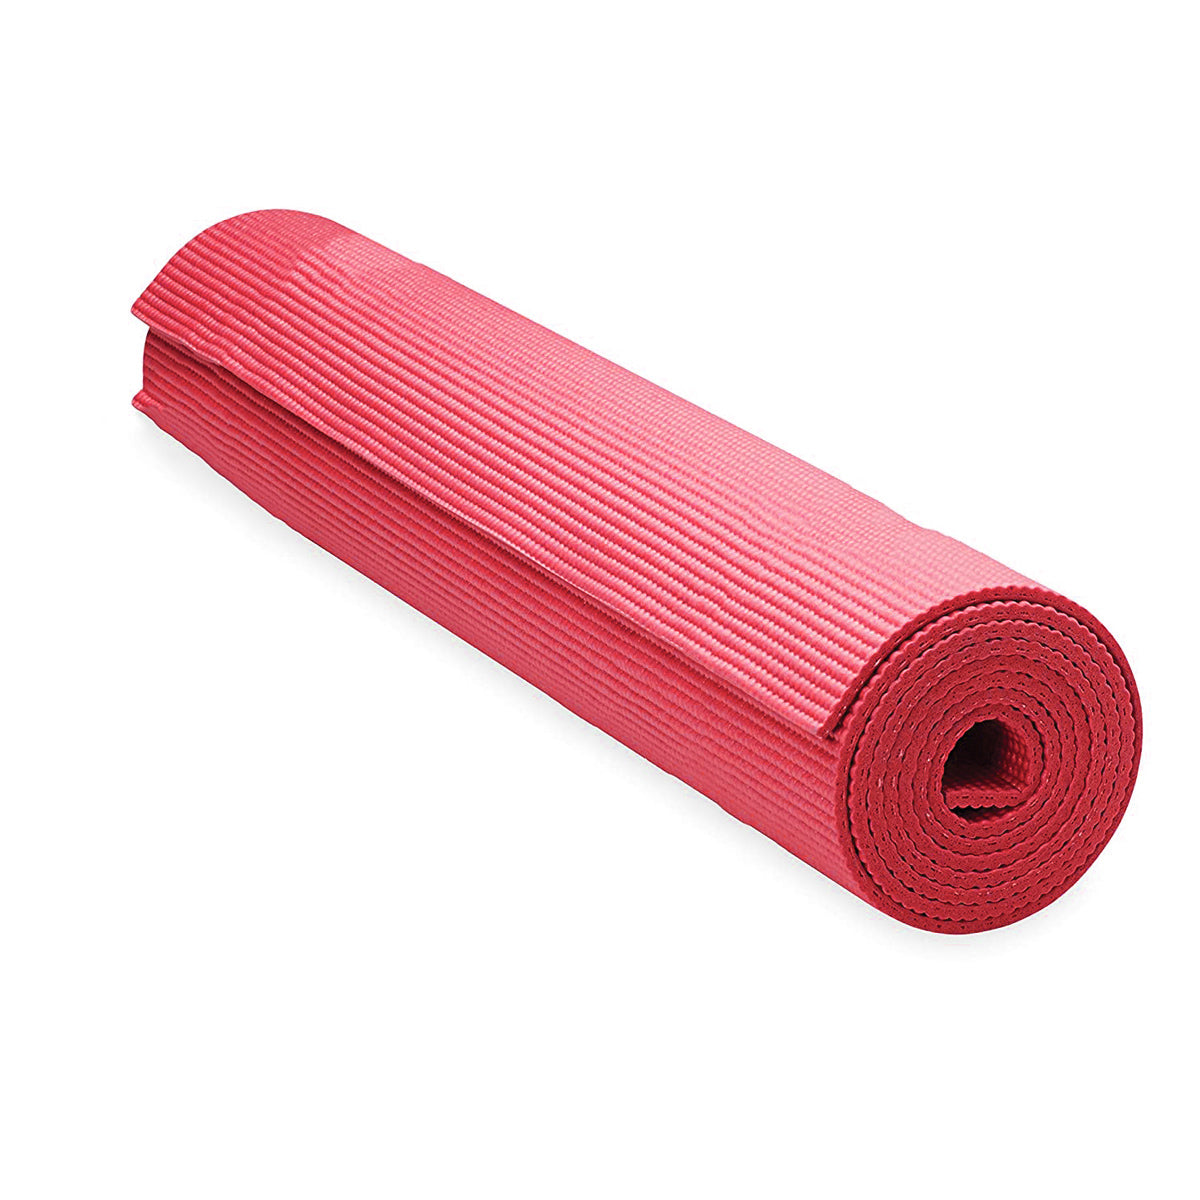 Kookee PVC Fitness Yoga Mat 3mm Thick for Workout, Gym, Yoga, Pilates Non-Slip and Eco-Friendly Mat (1727)